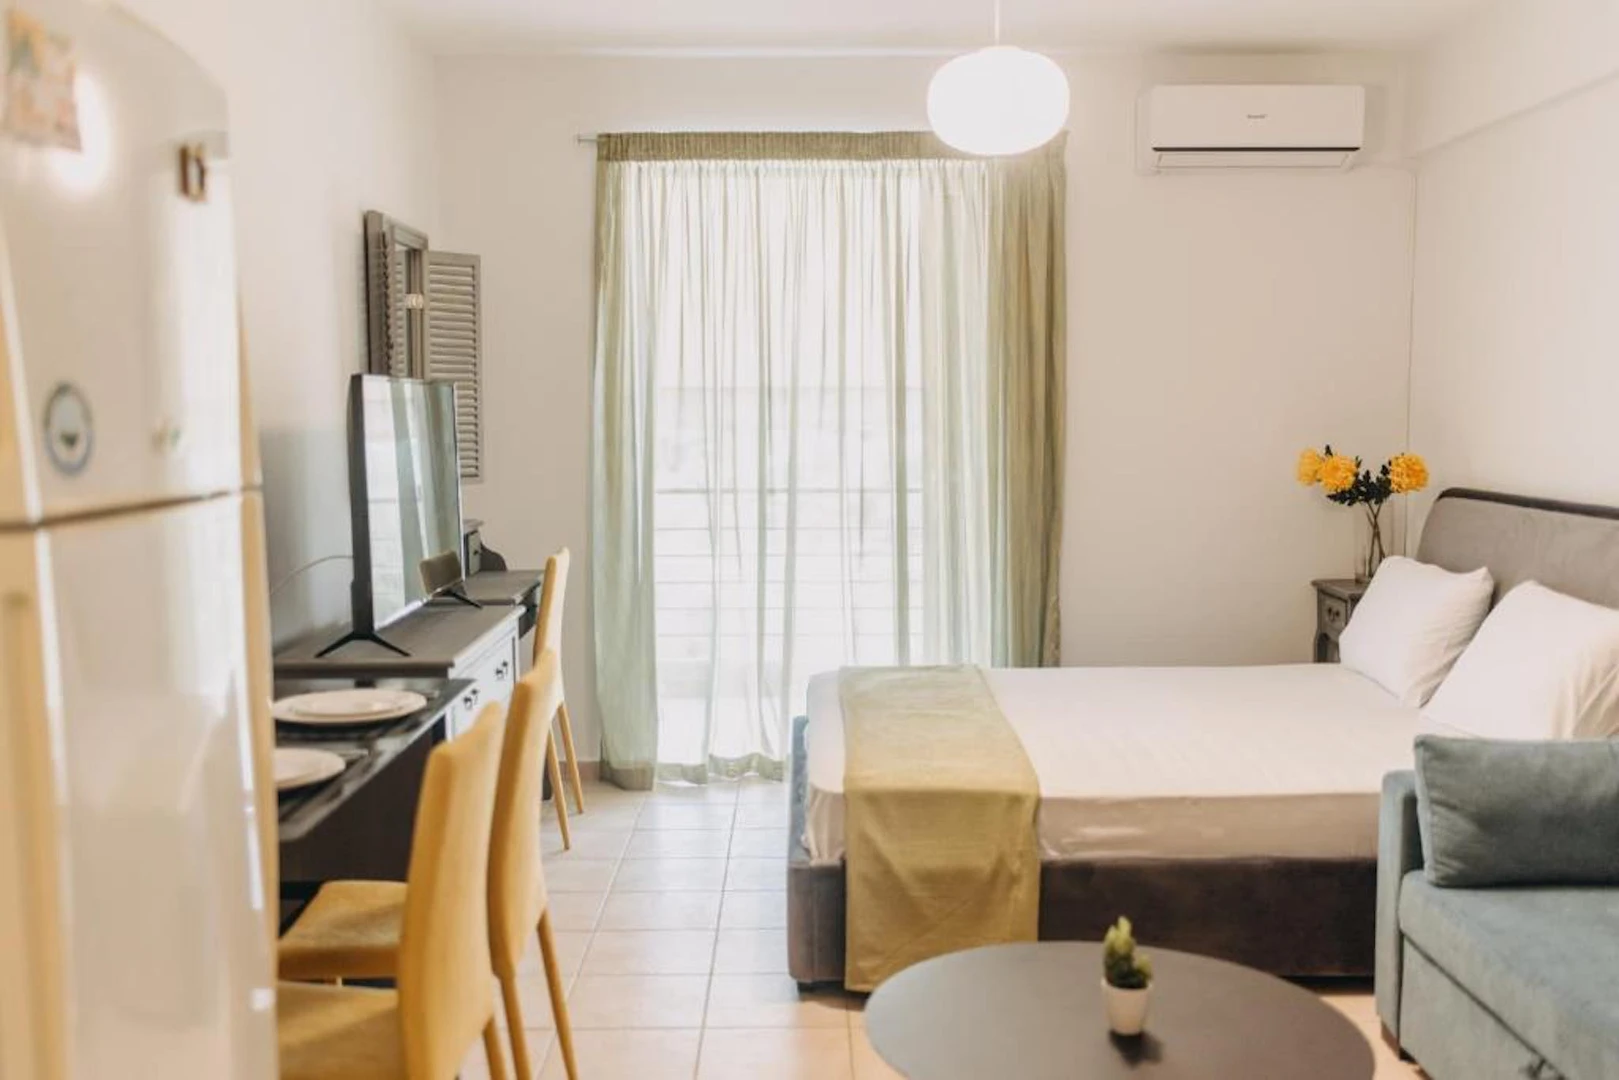 Accommodation in the centre of Patras